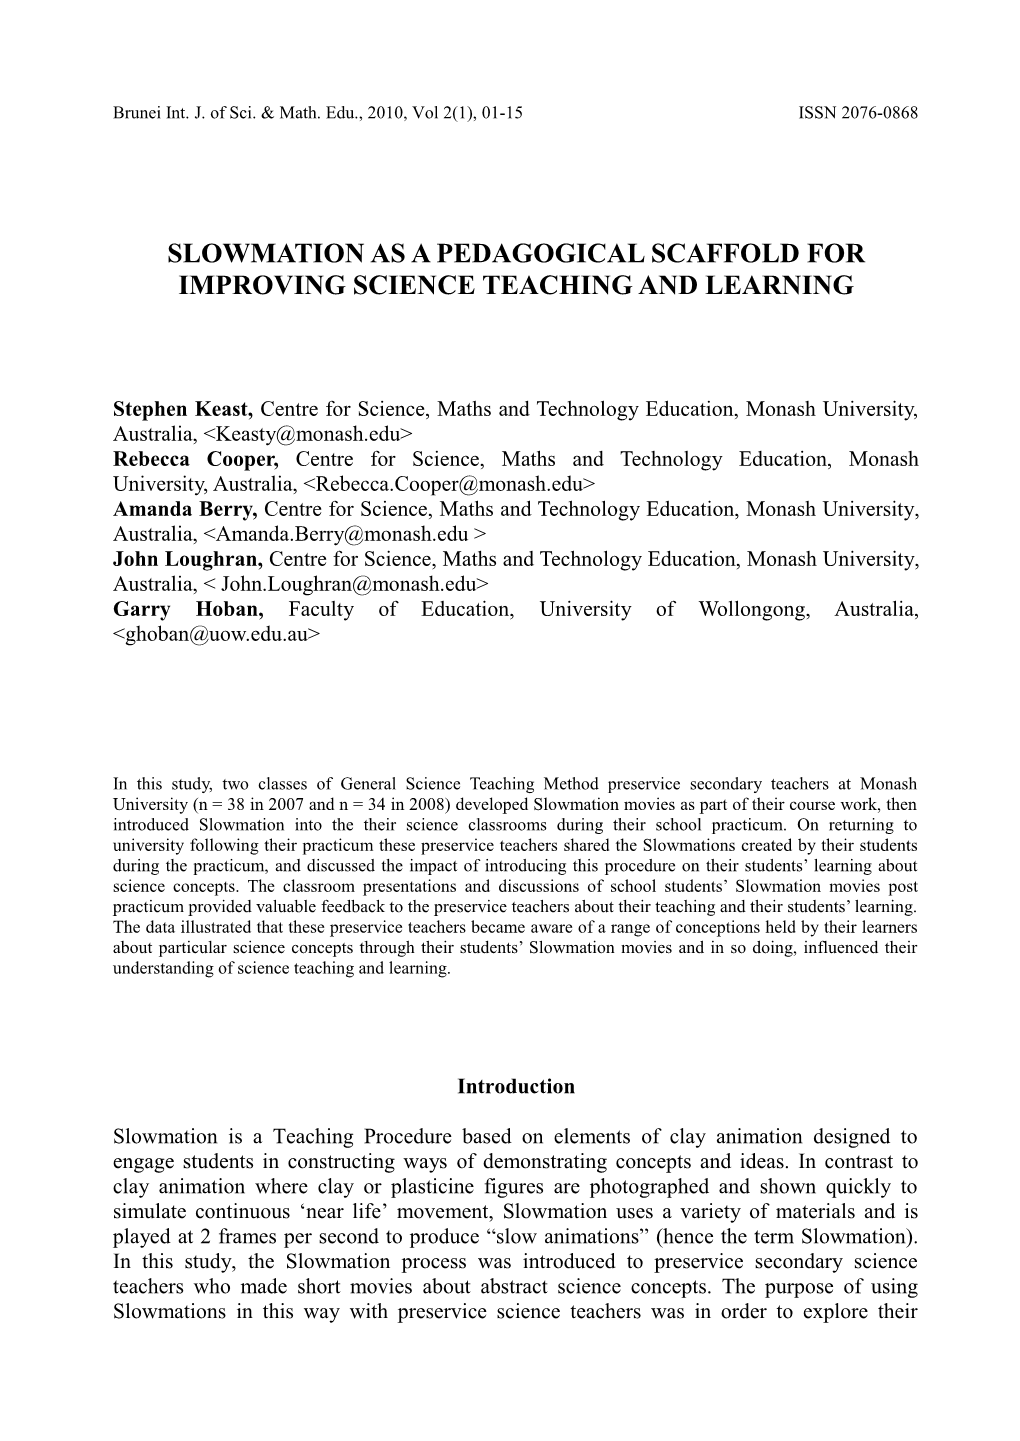 Slowmation As a Pedagogical Scaffold for Improving Science Teaching and Learning